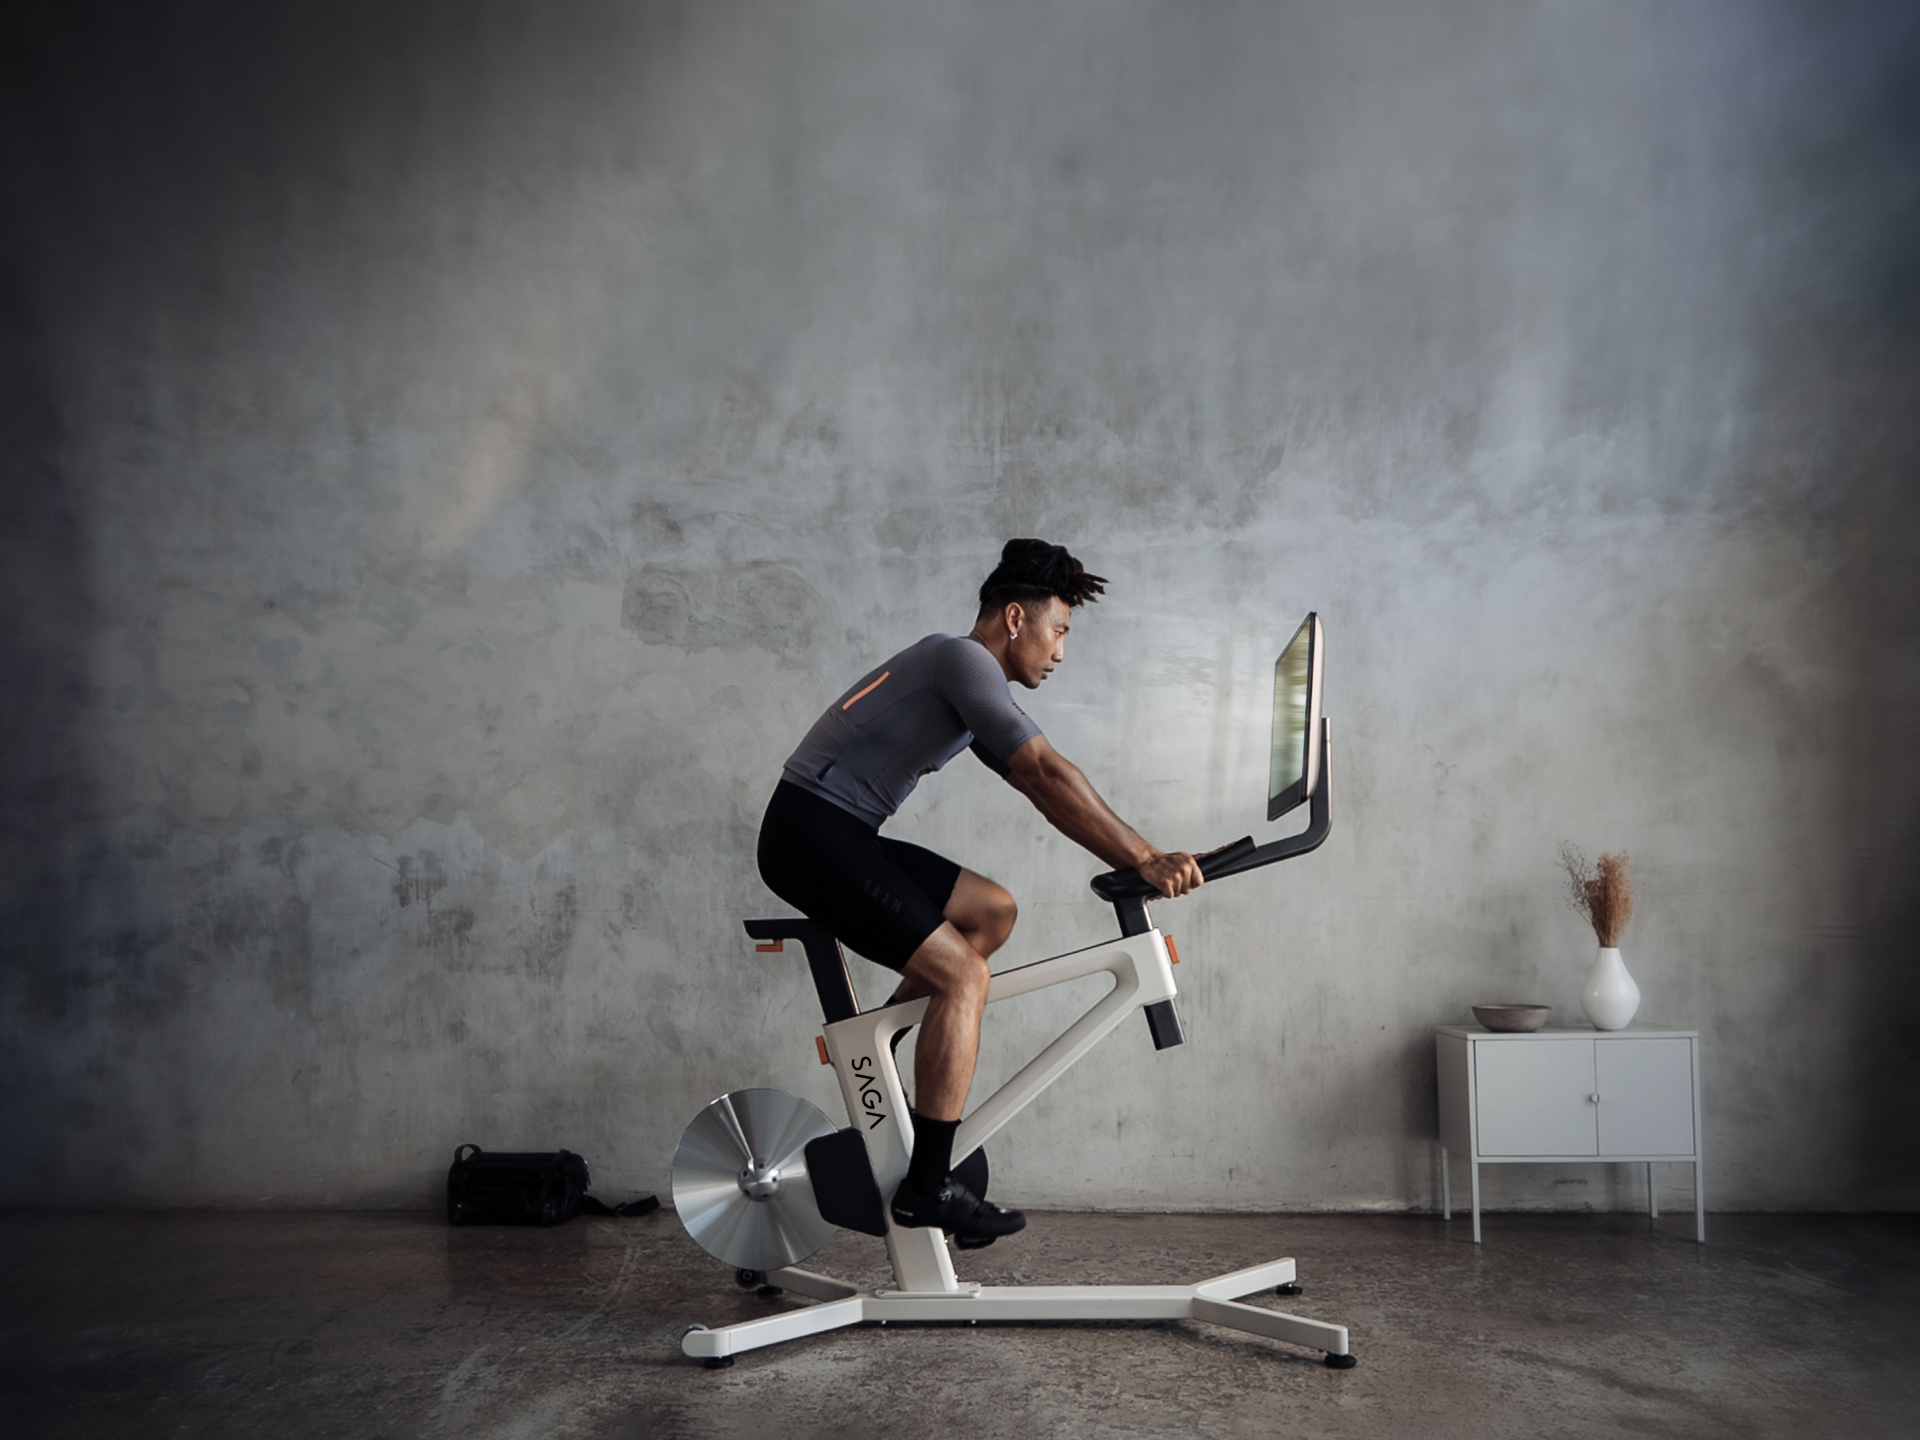 HoloBike - a $2599 exercise bike with a holographic 3D display from a former Google engineer